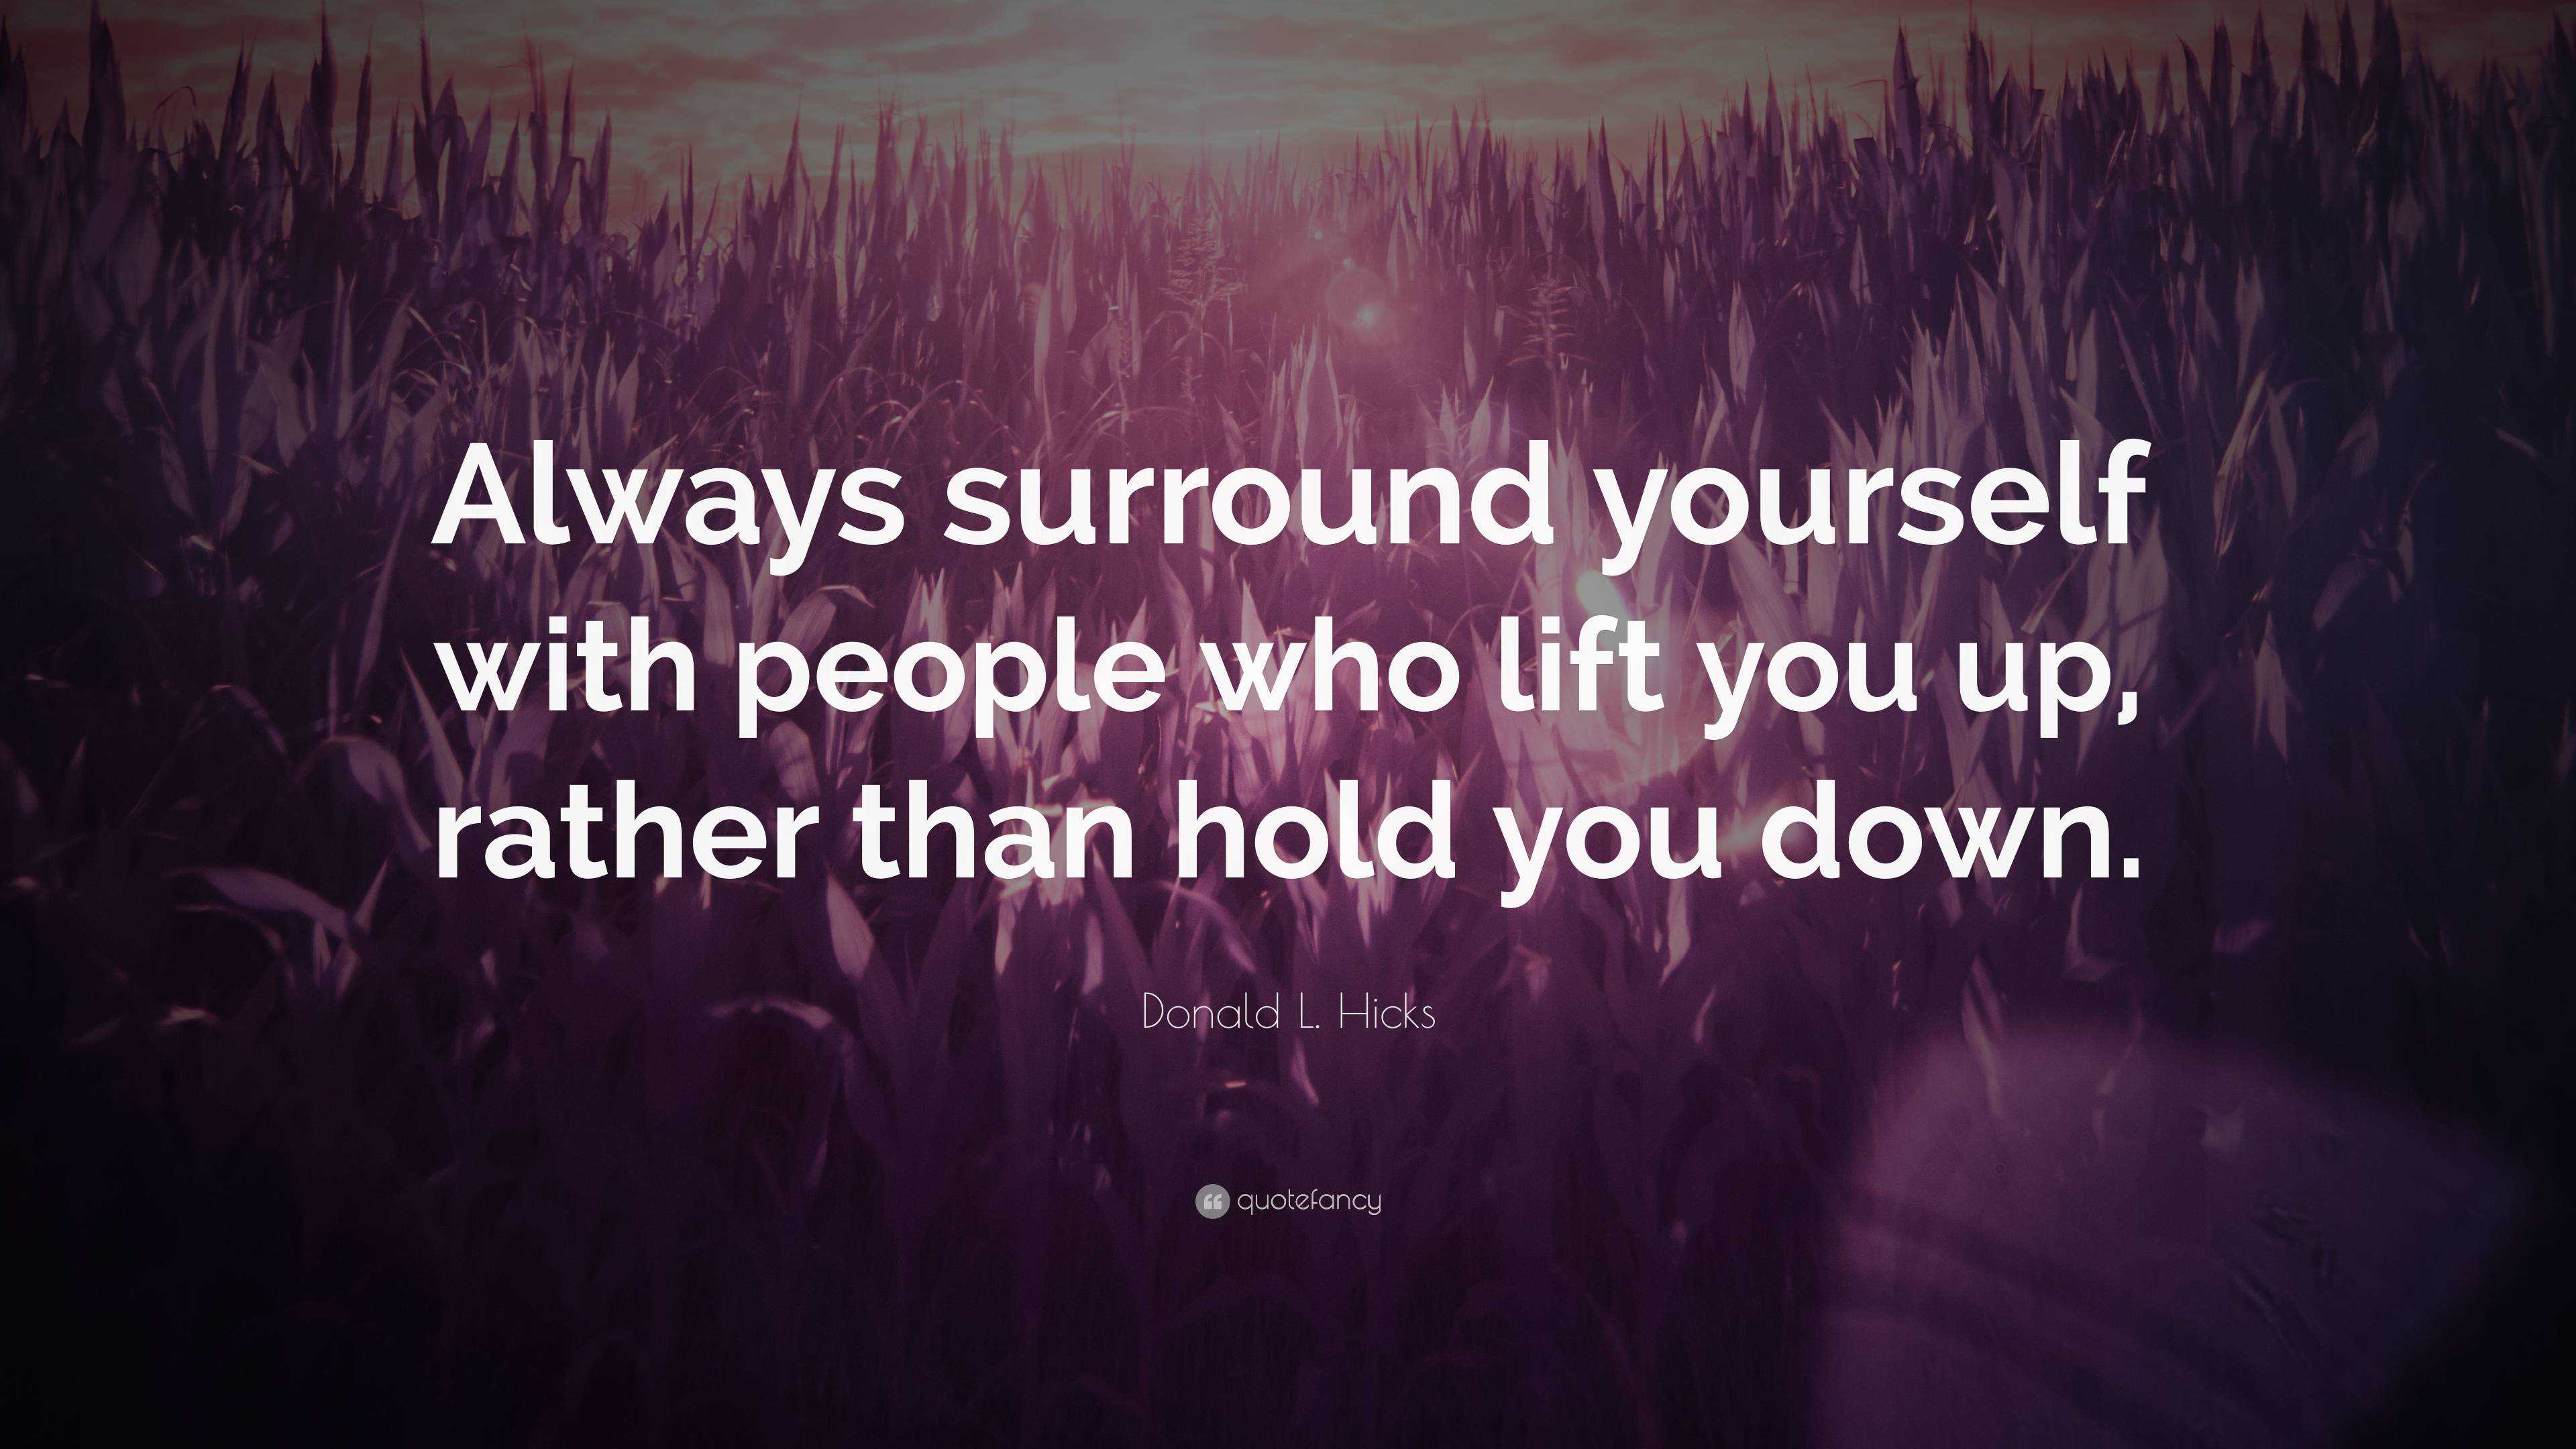 Donald L. Hicks Quote: “Always surround yourself with people who